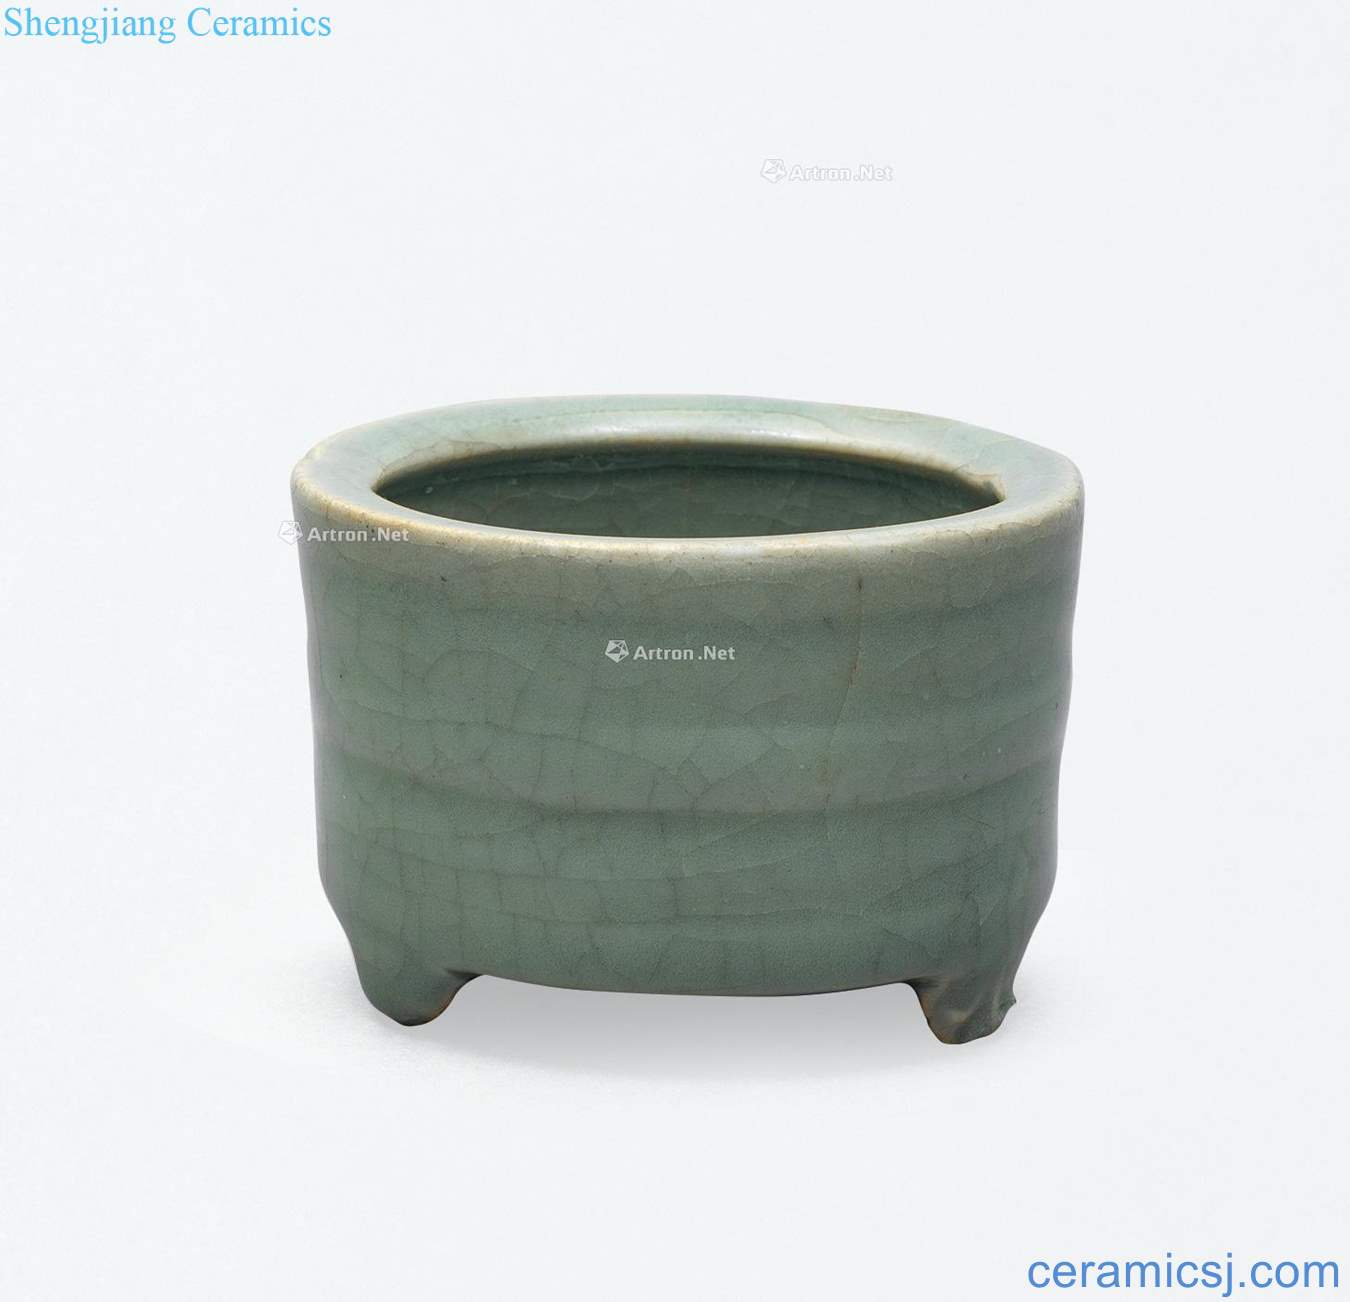 The southern song dynasty Longquan celadon glaze small incense burner